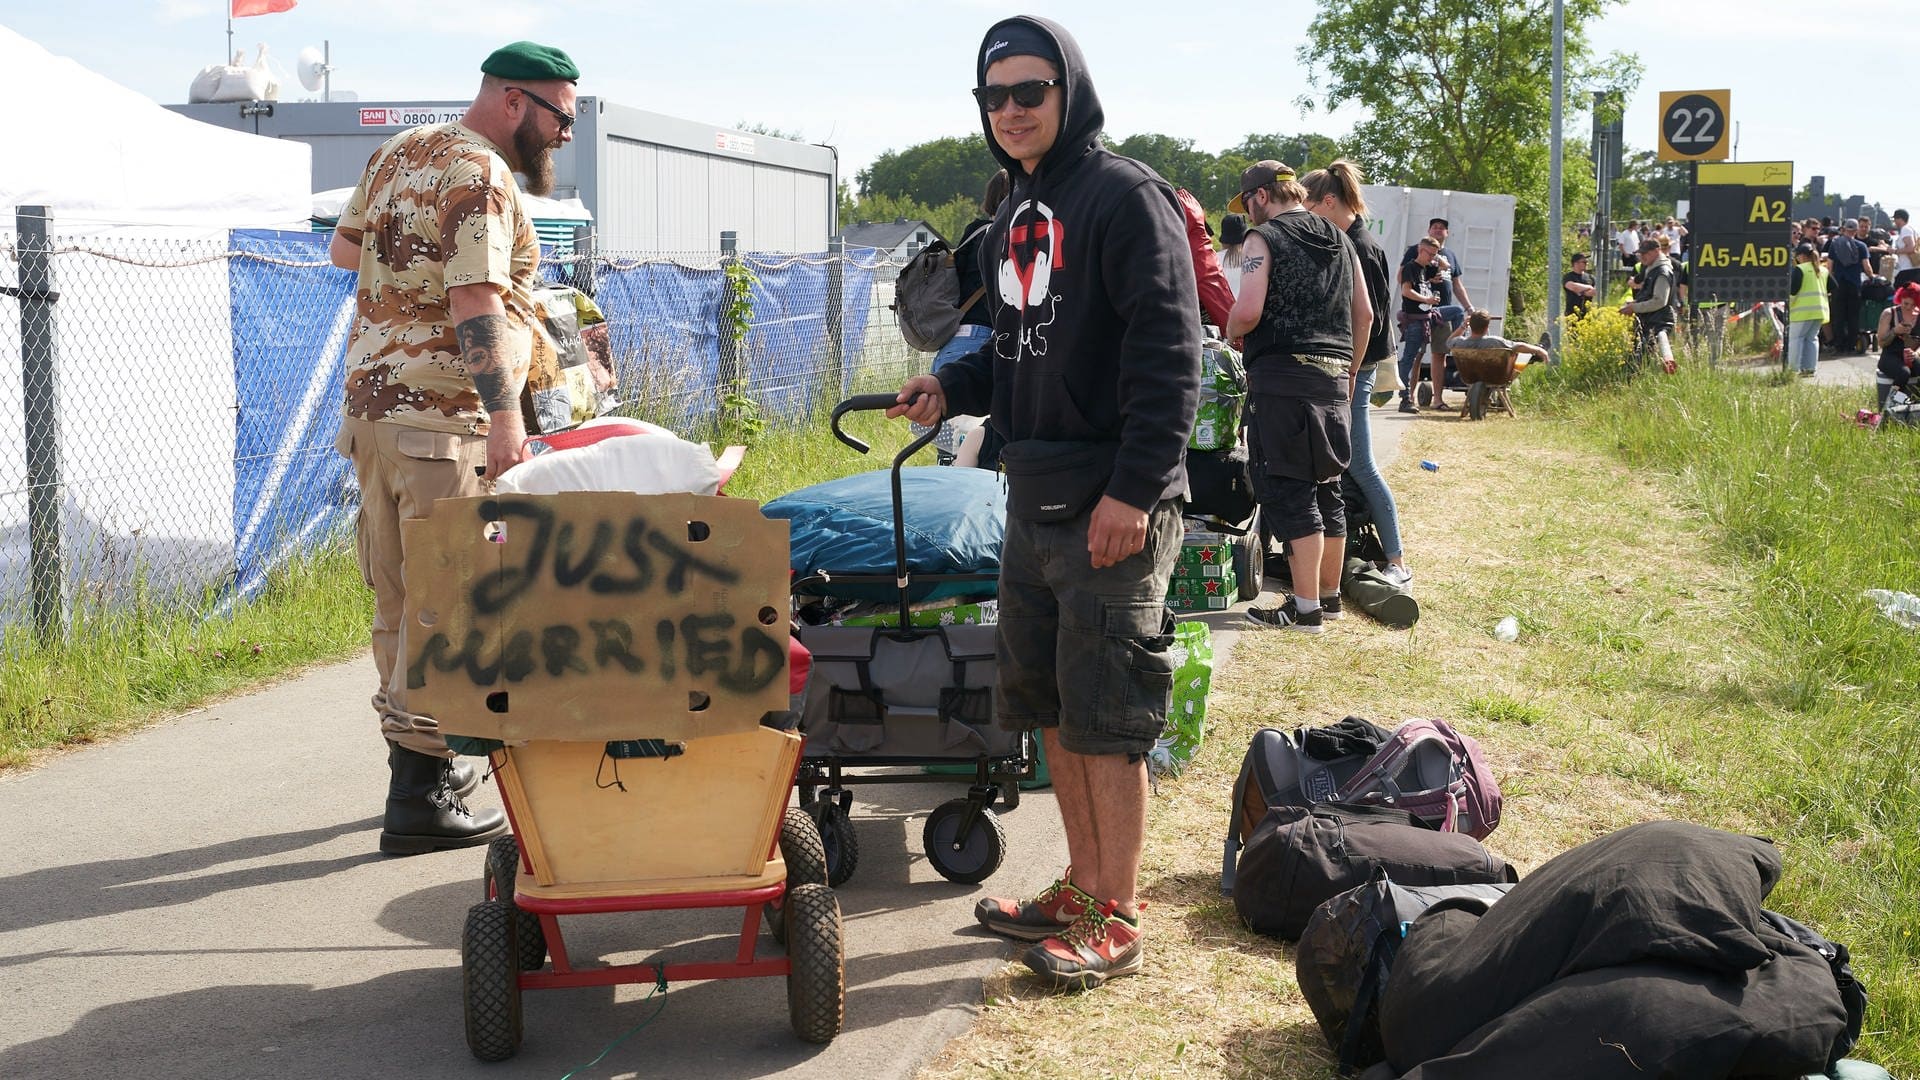 Rock am Ring (Foto: picture-alliance / Reportdienste, picture alliance/dpa | Thomas Frey)